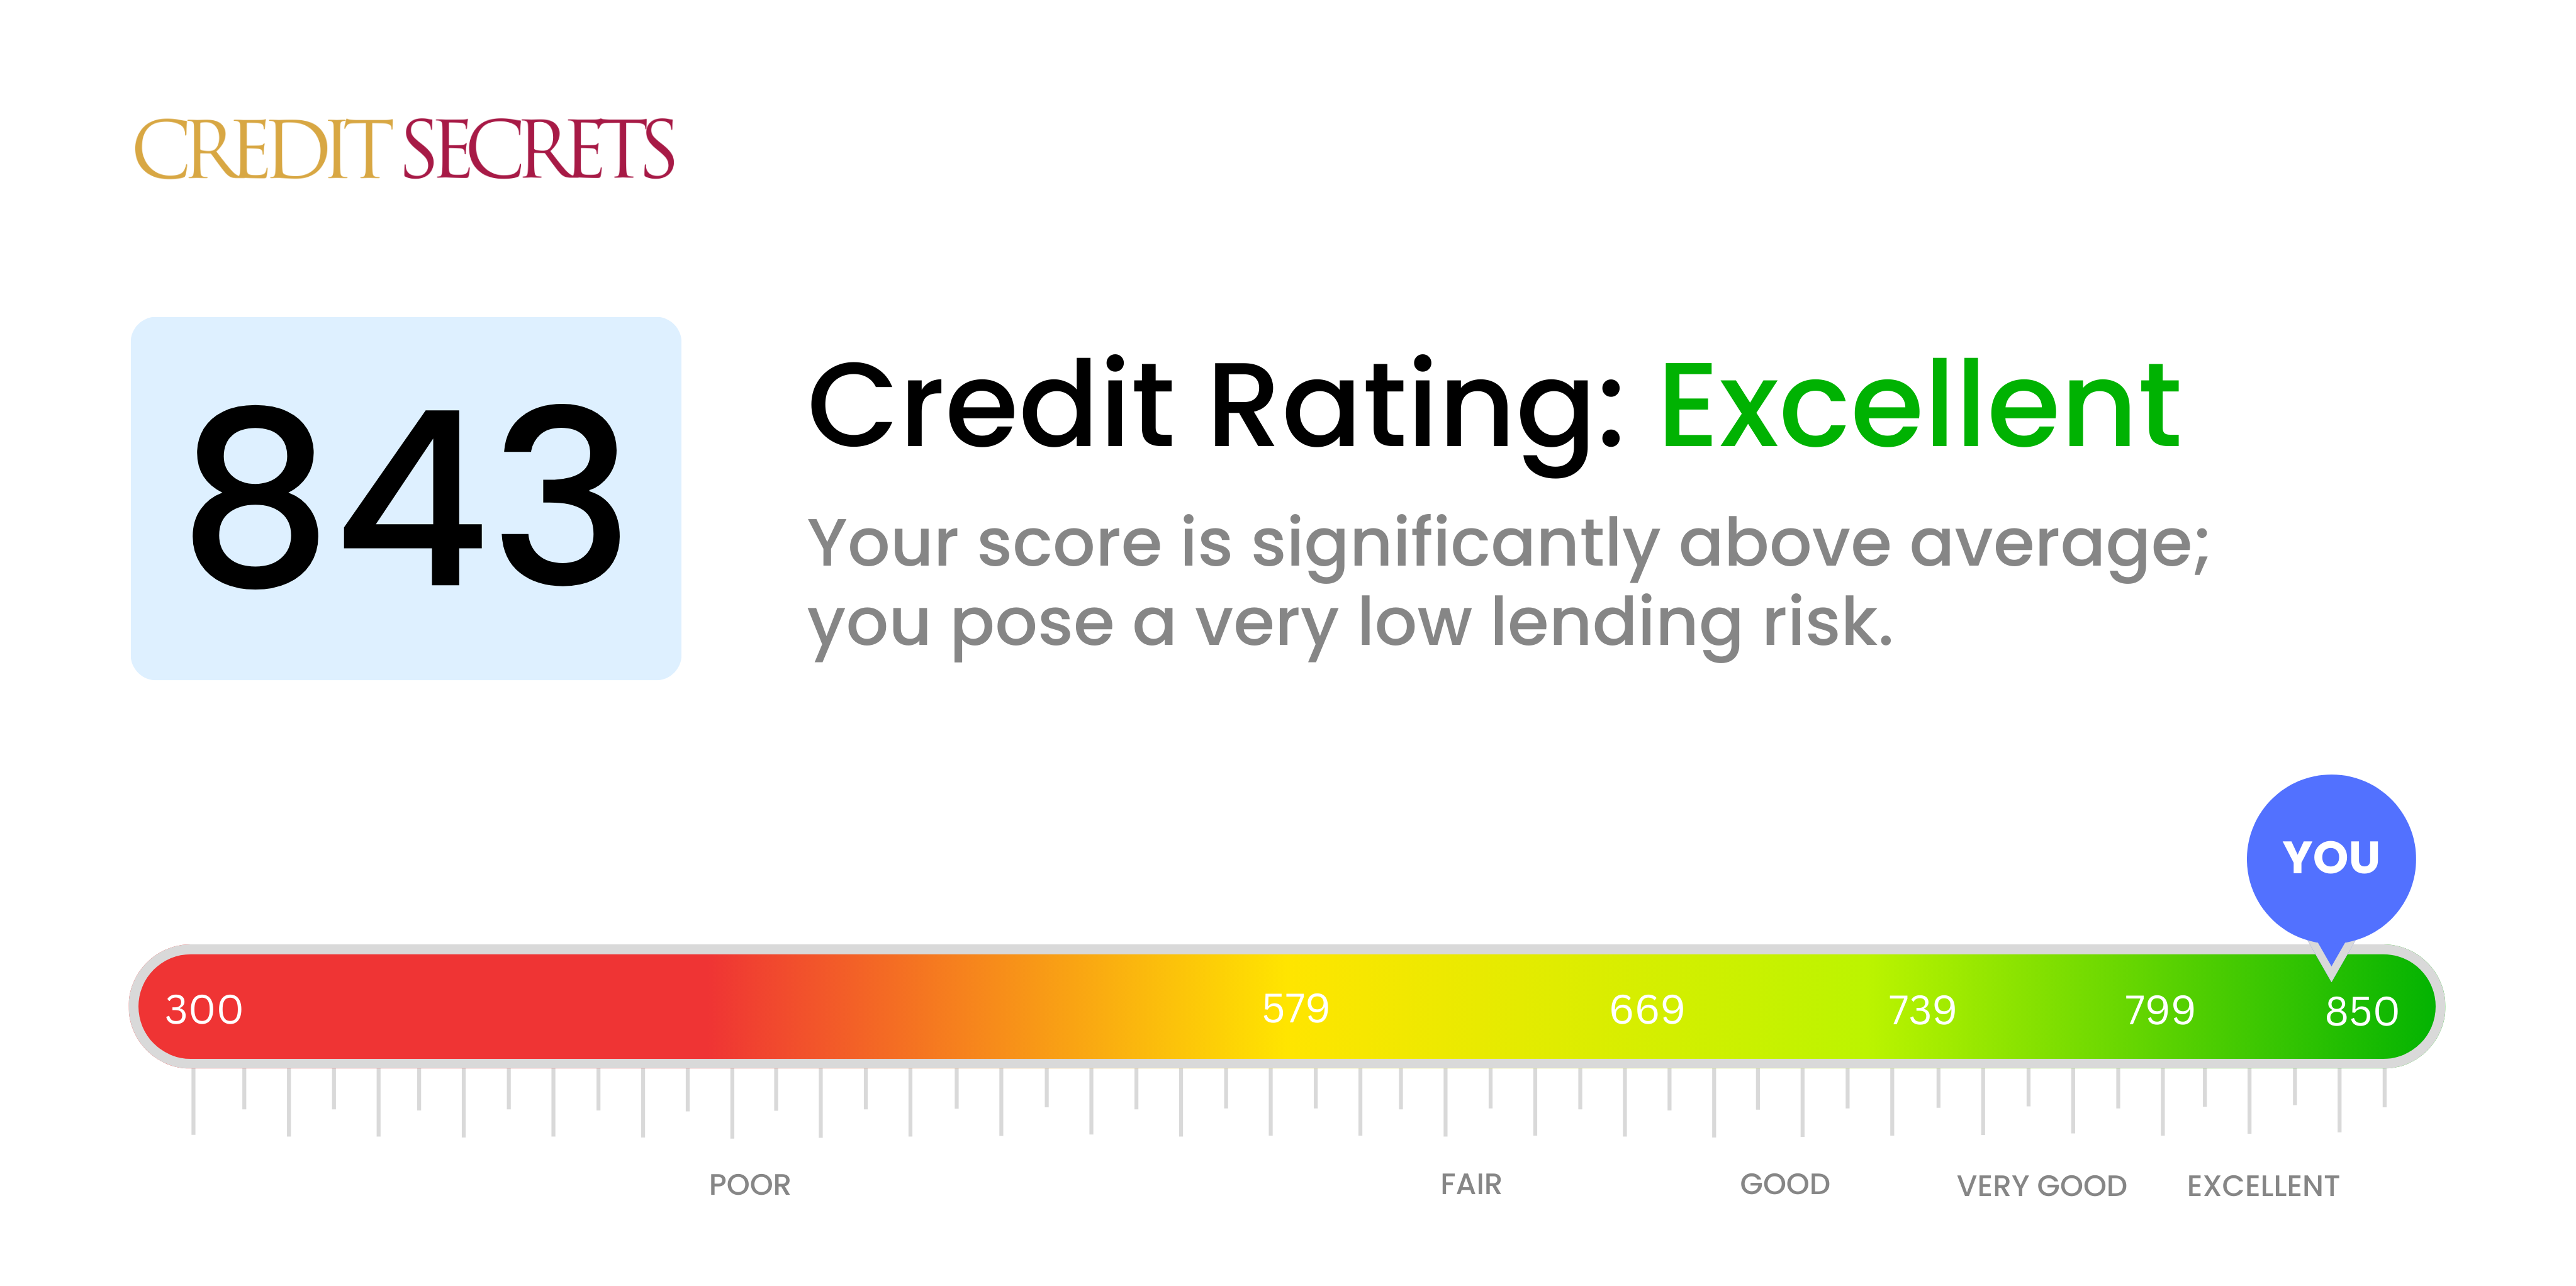 Is 843 a good credit score?